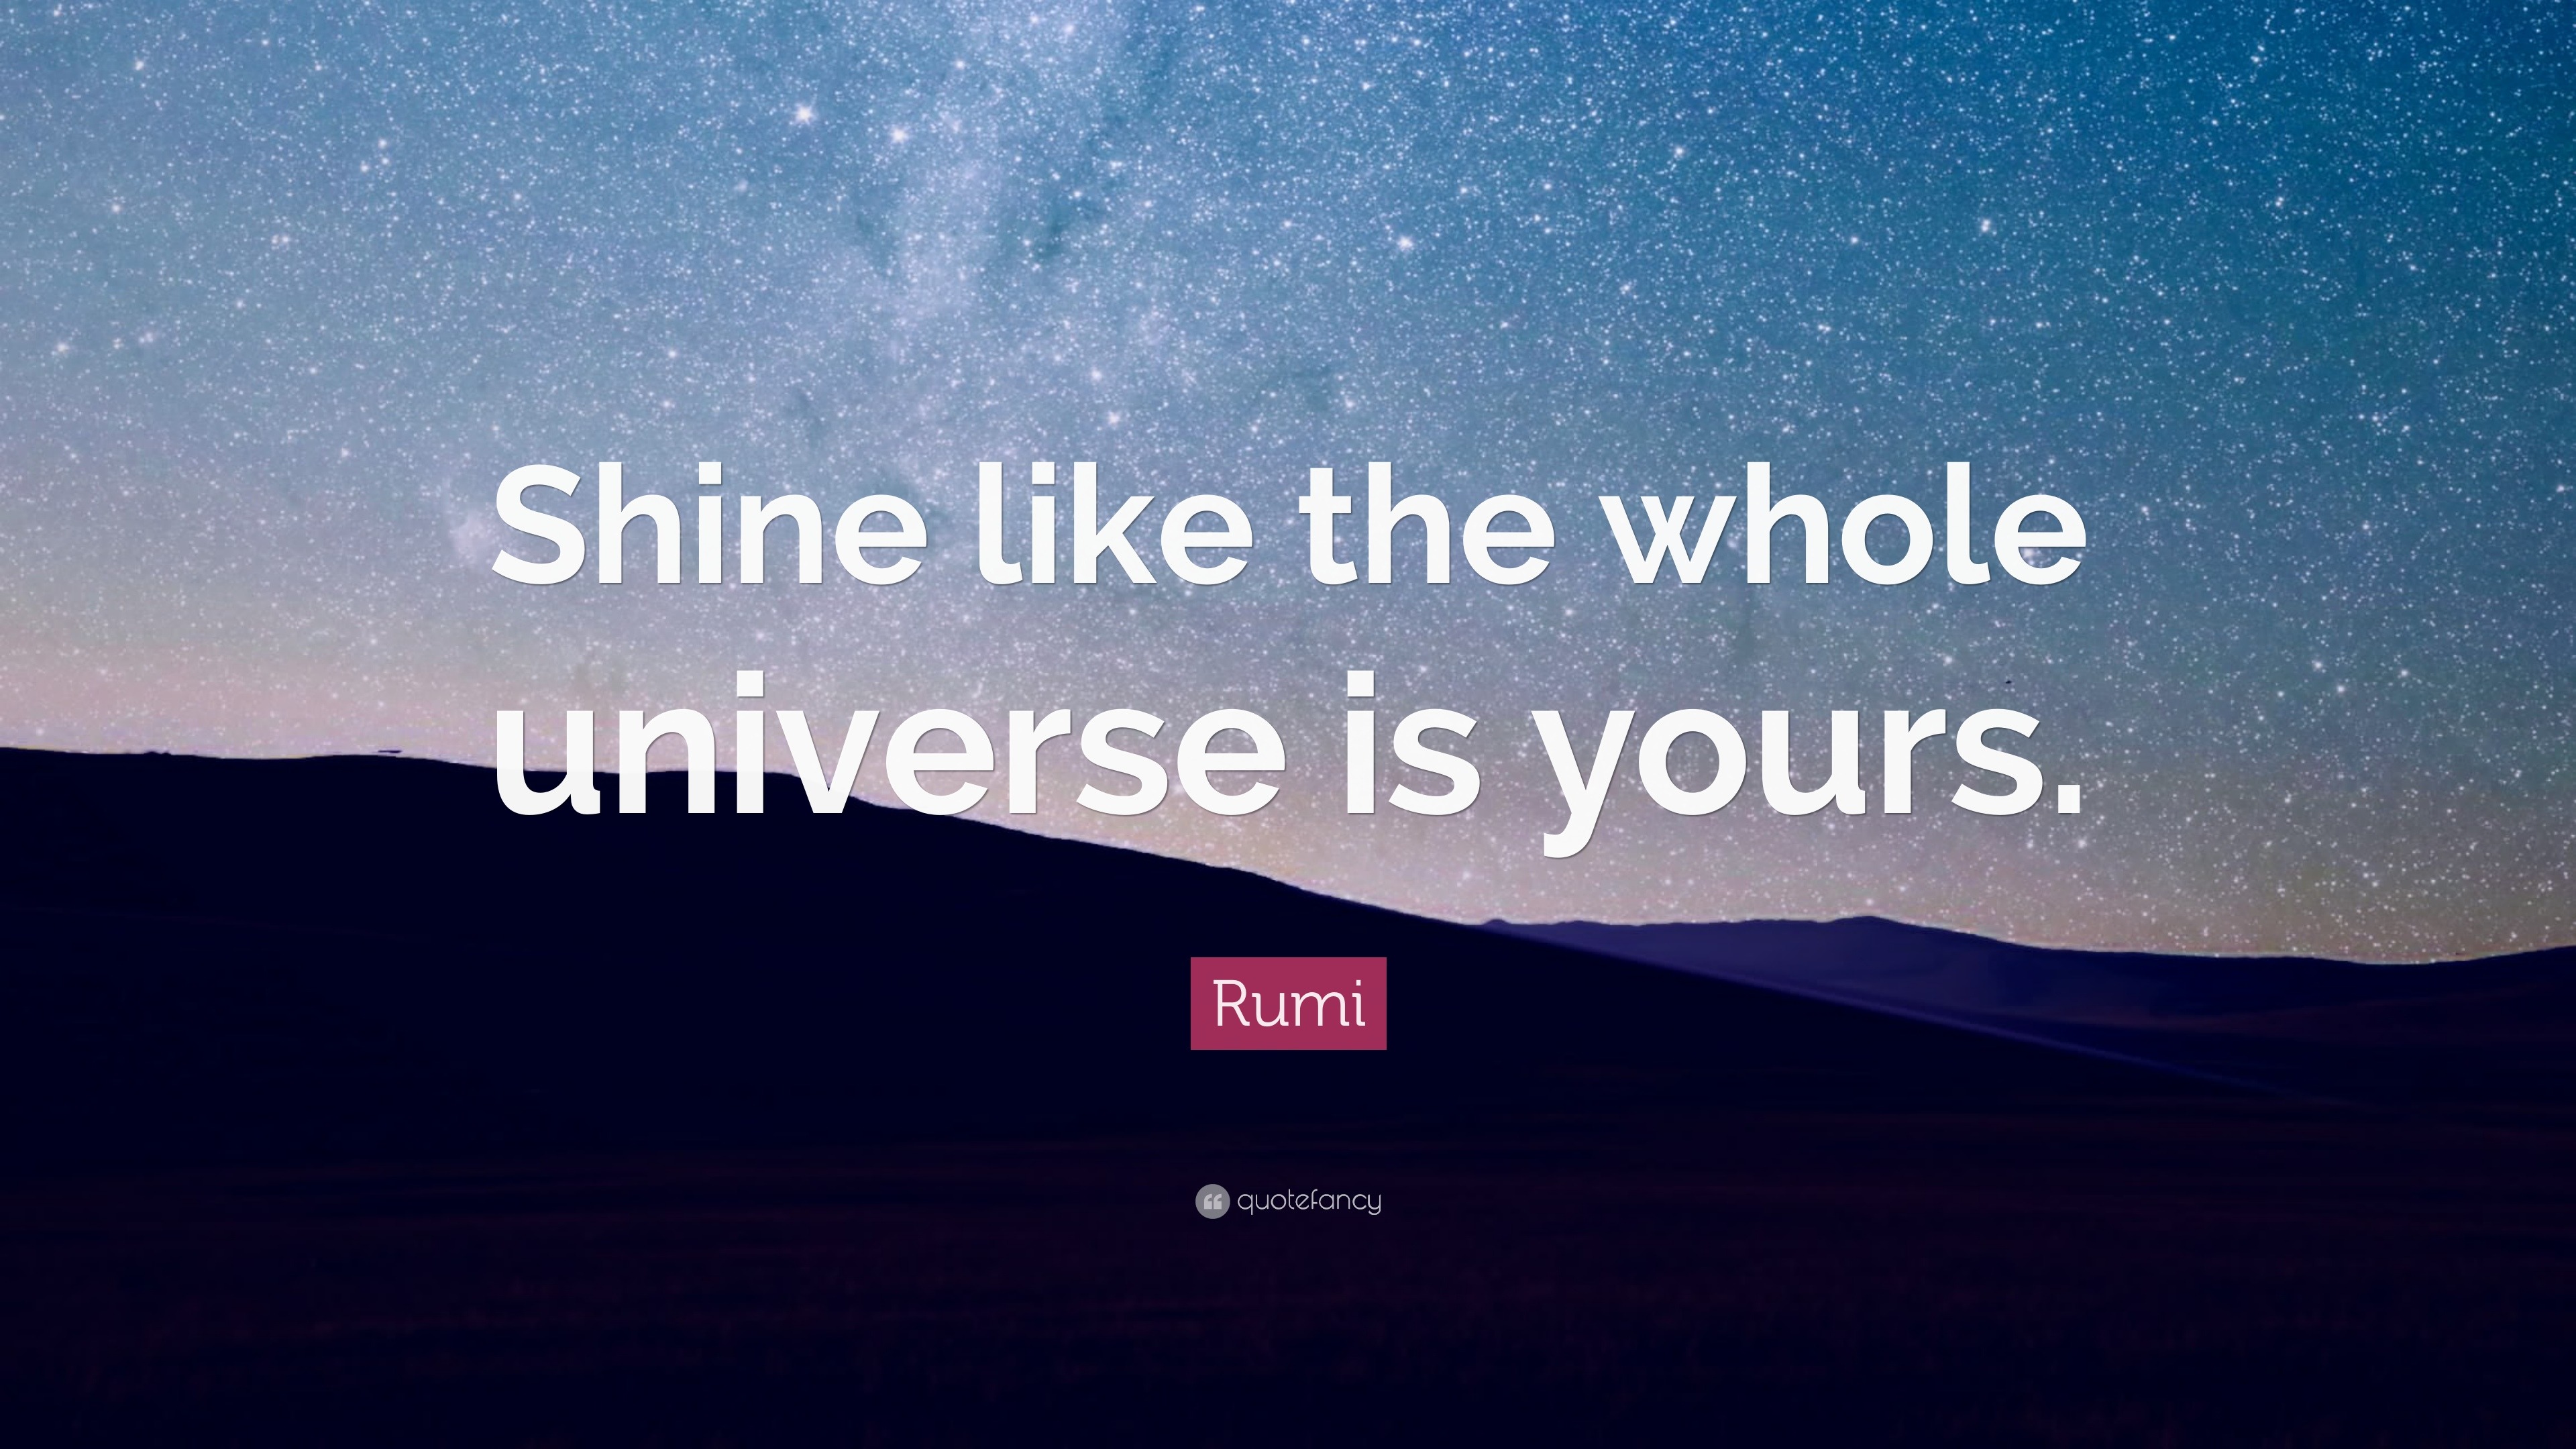 Rumi Quote: “Shine like the whole universe is yours.”